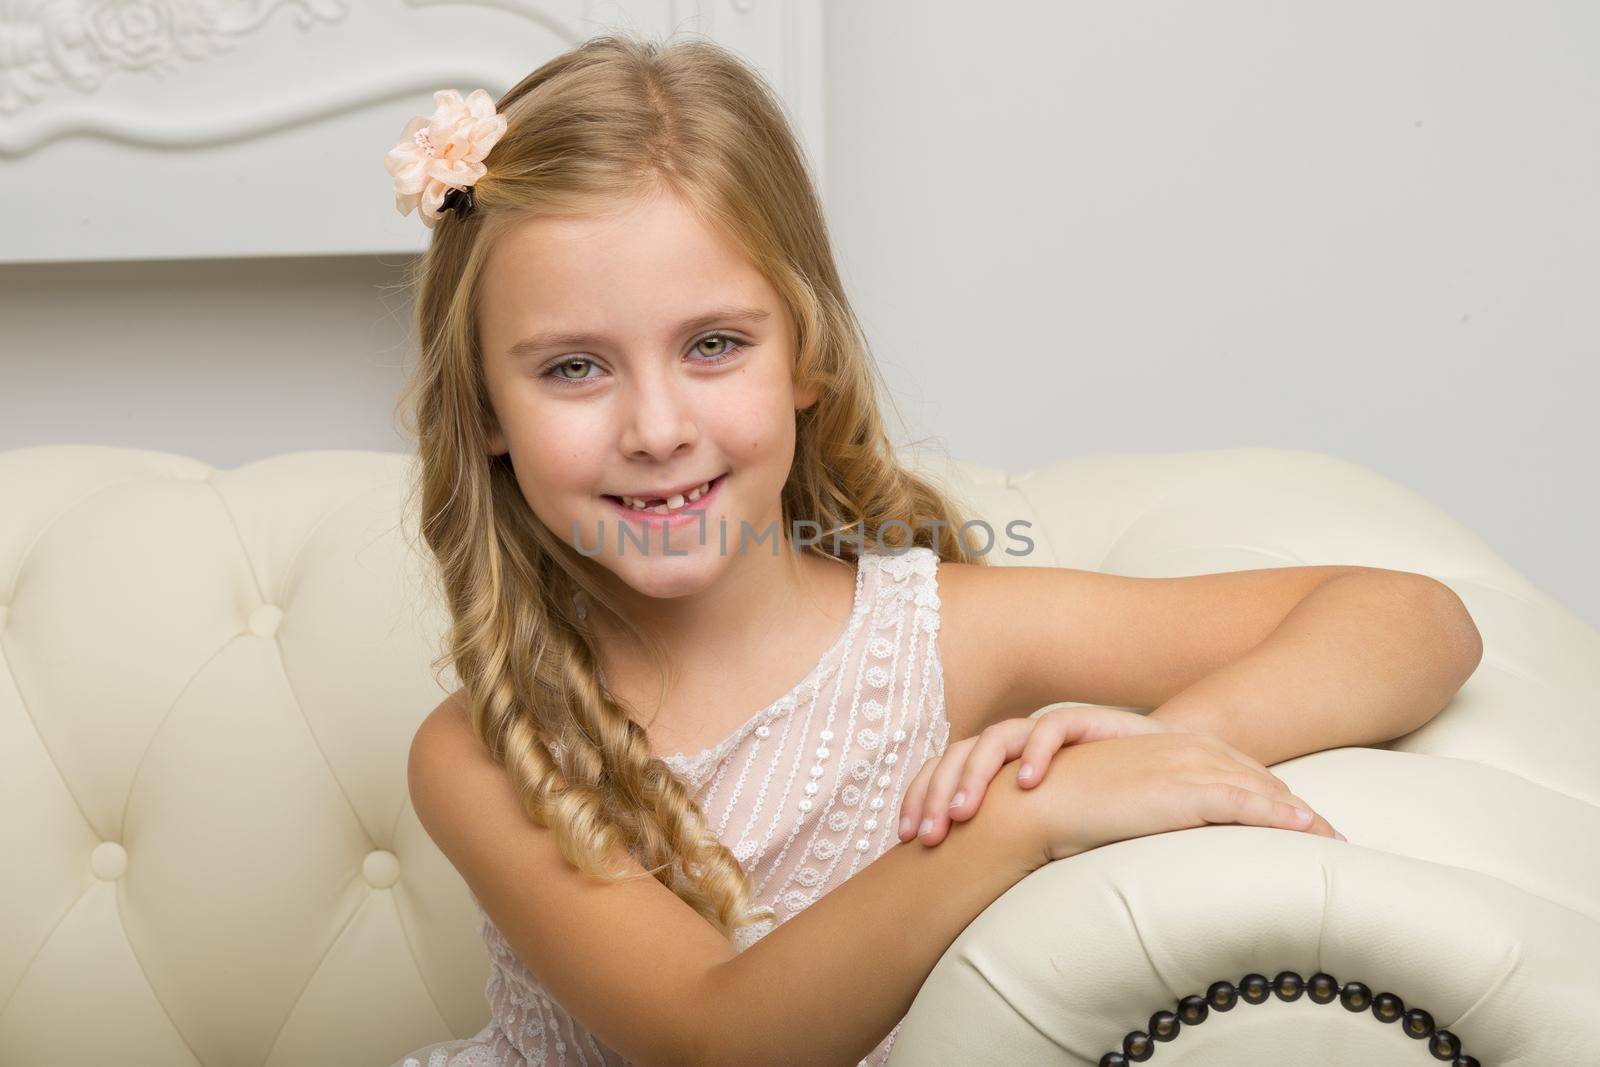 Beautiful happy girl sitting on sofa. Retro style closeup portrait of smiling blonde girl in nice dress sitting on comfortable couch. Adorable happy seven years old kid posing in studio